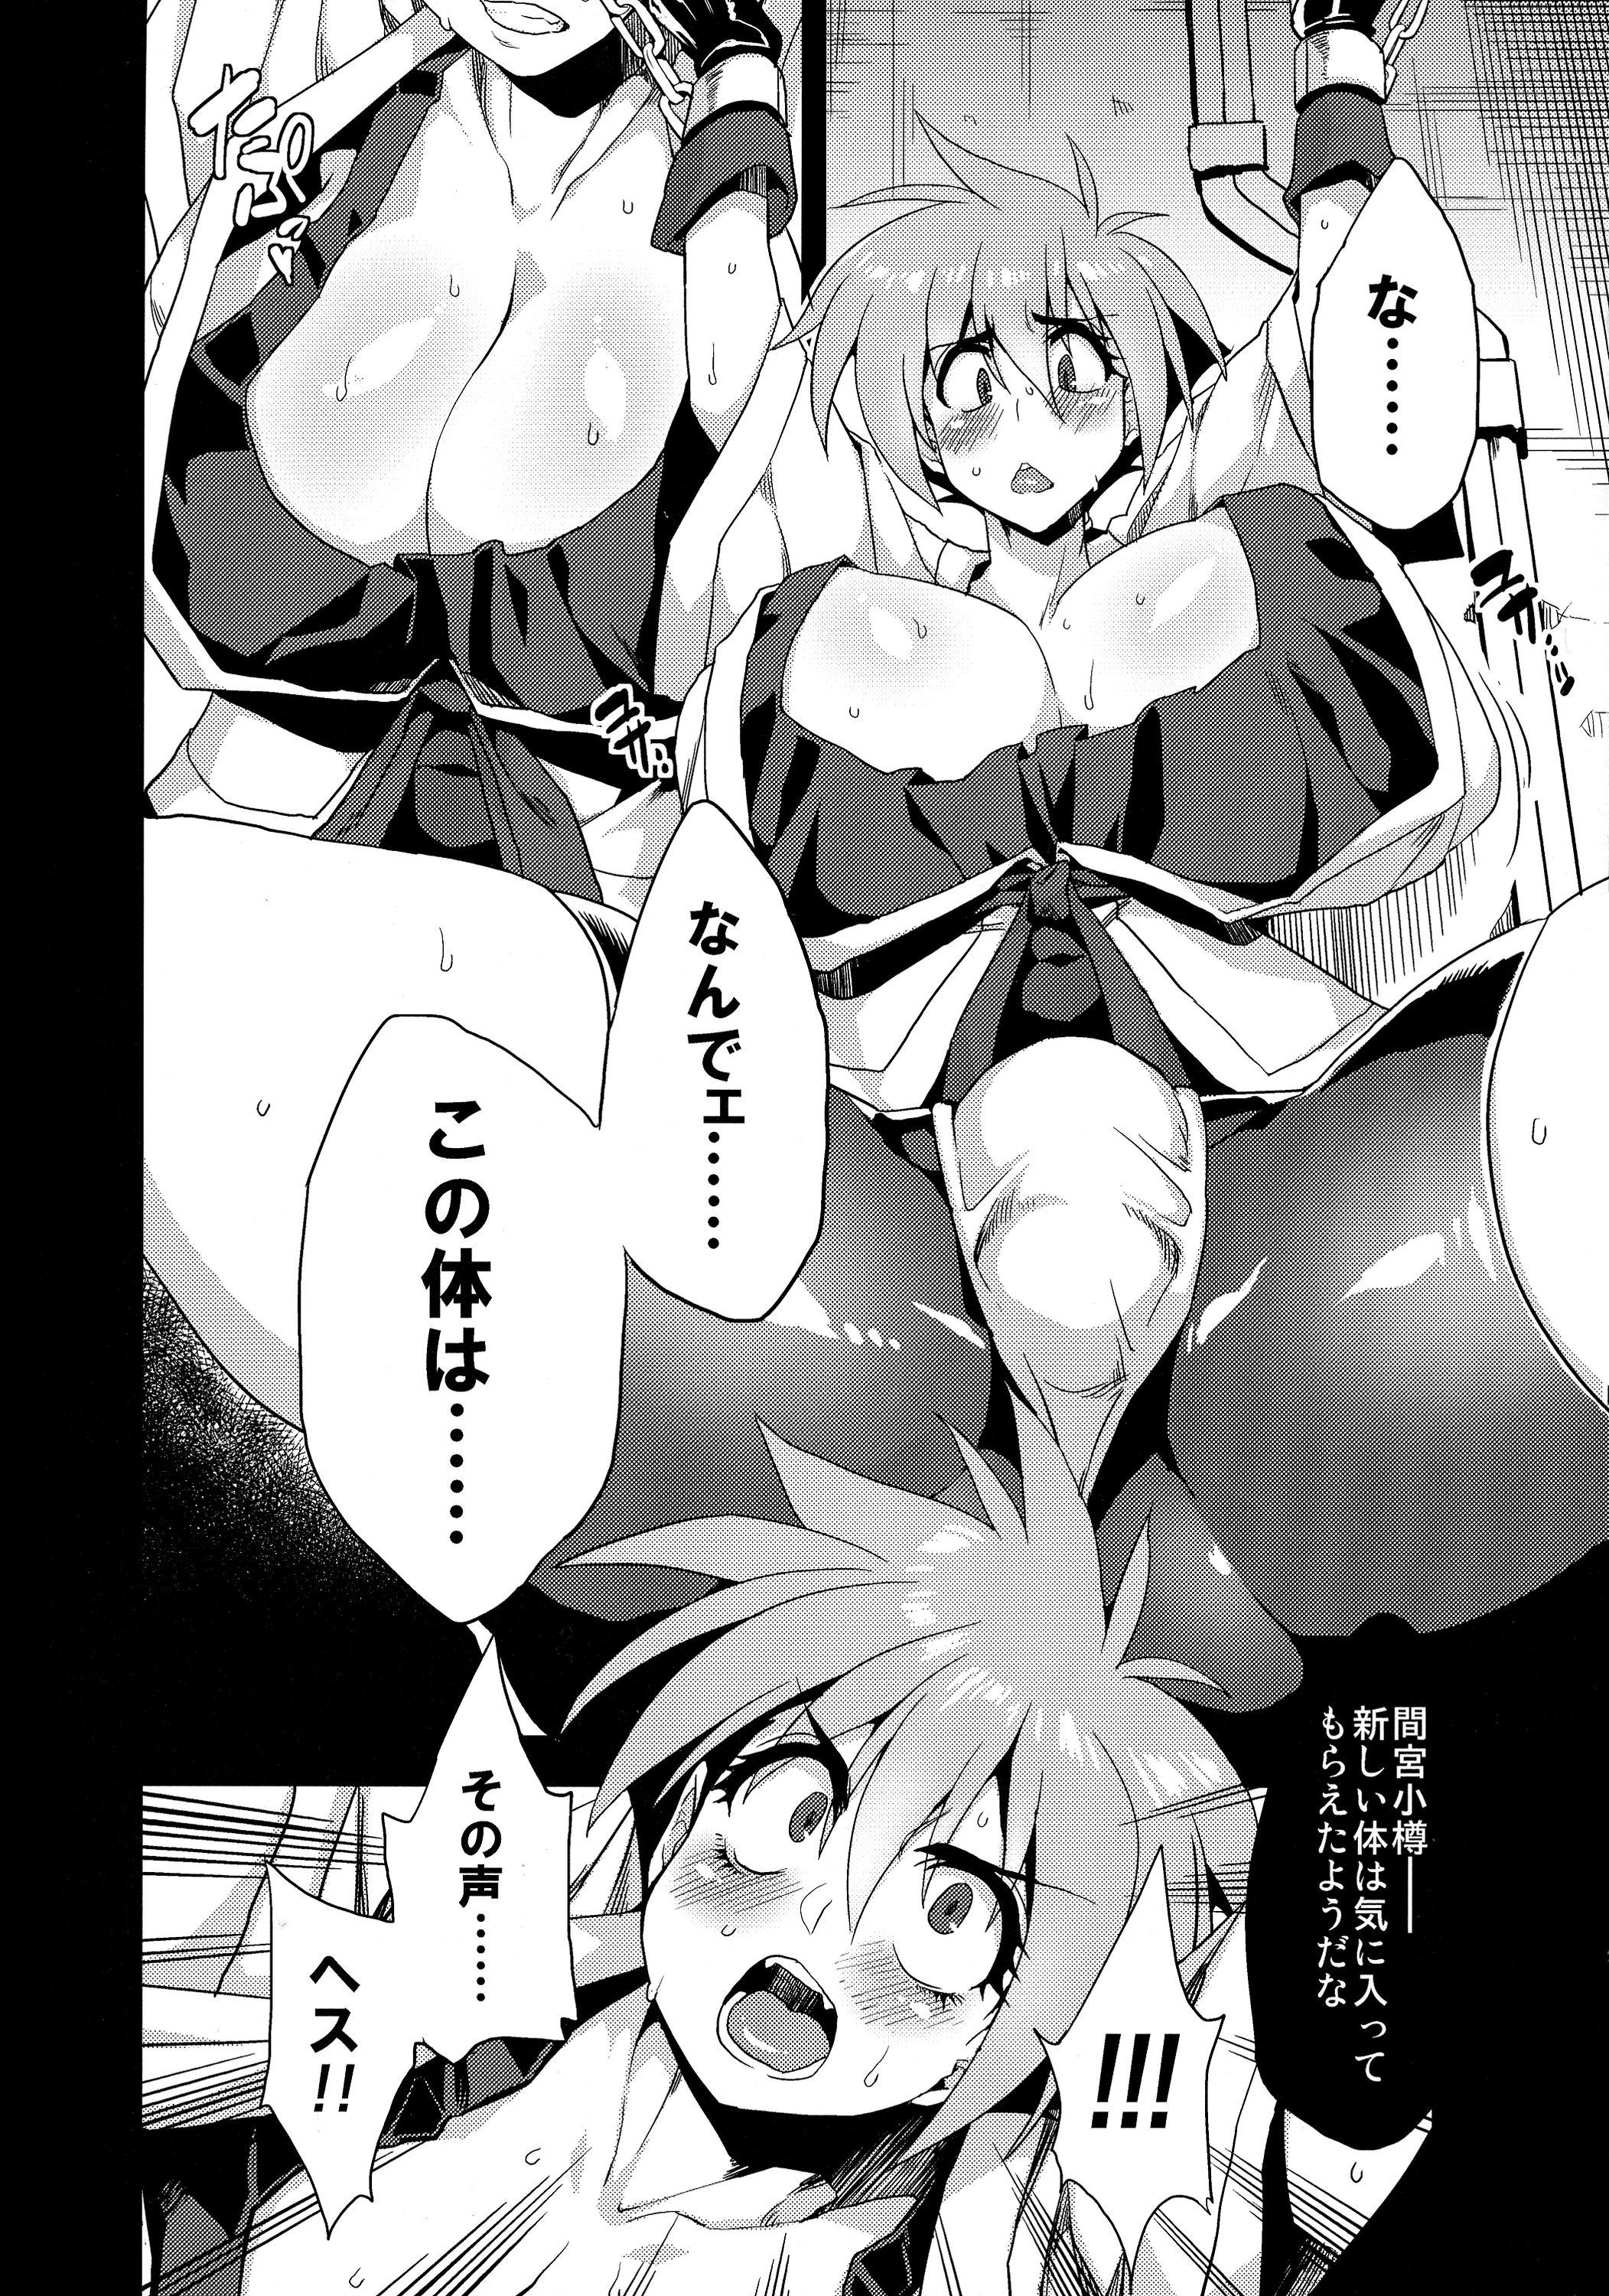 Rough Sex Hentai Marionette 3 - Saber marionette Trimmed - Page 4